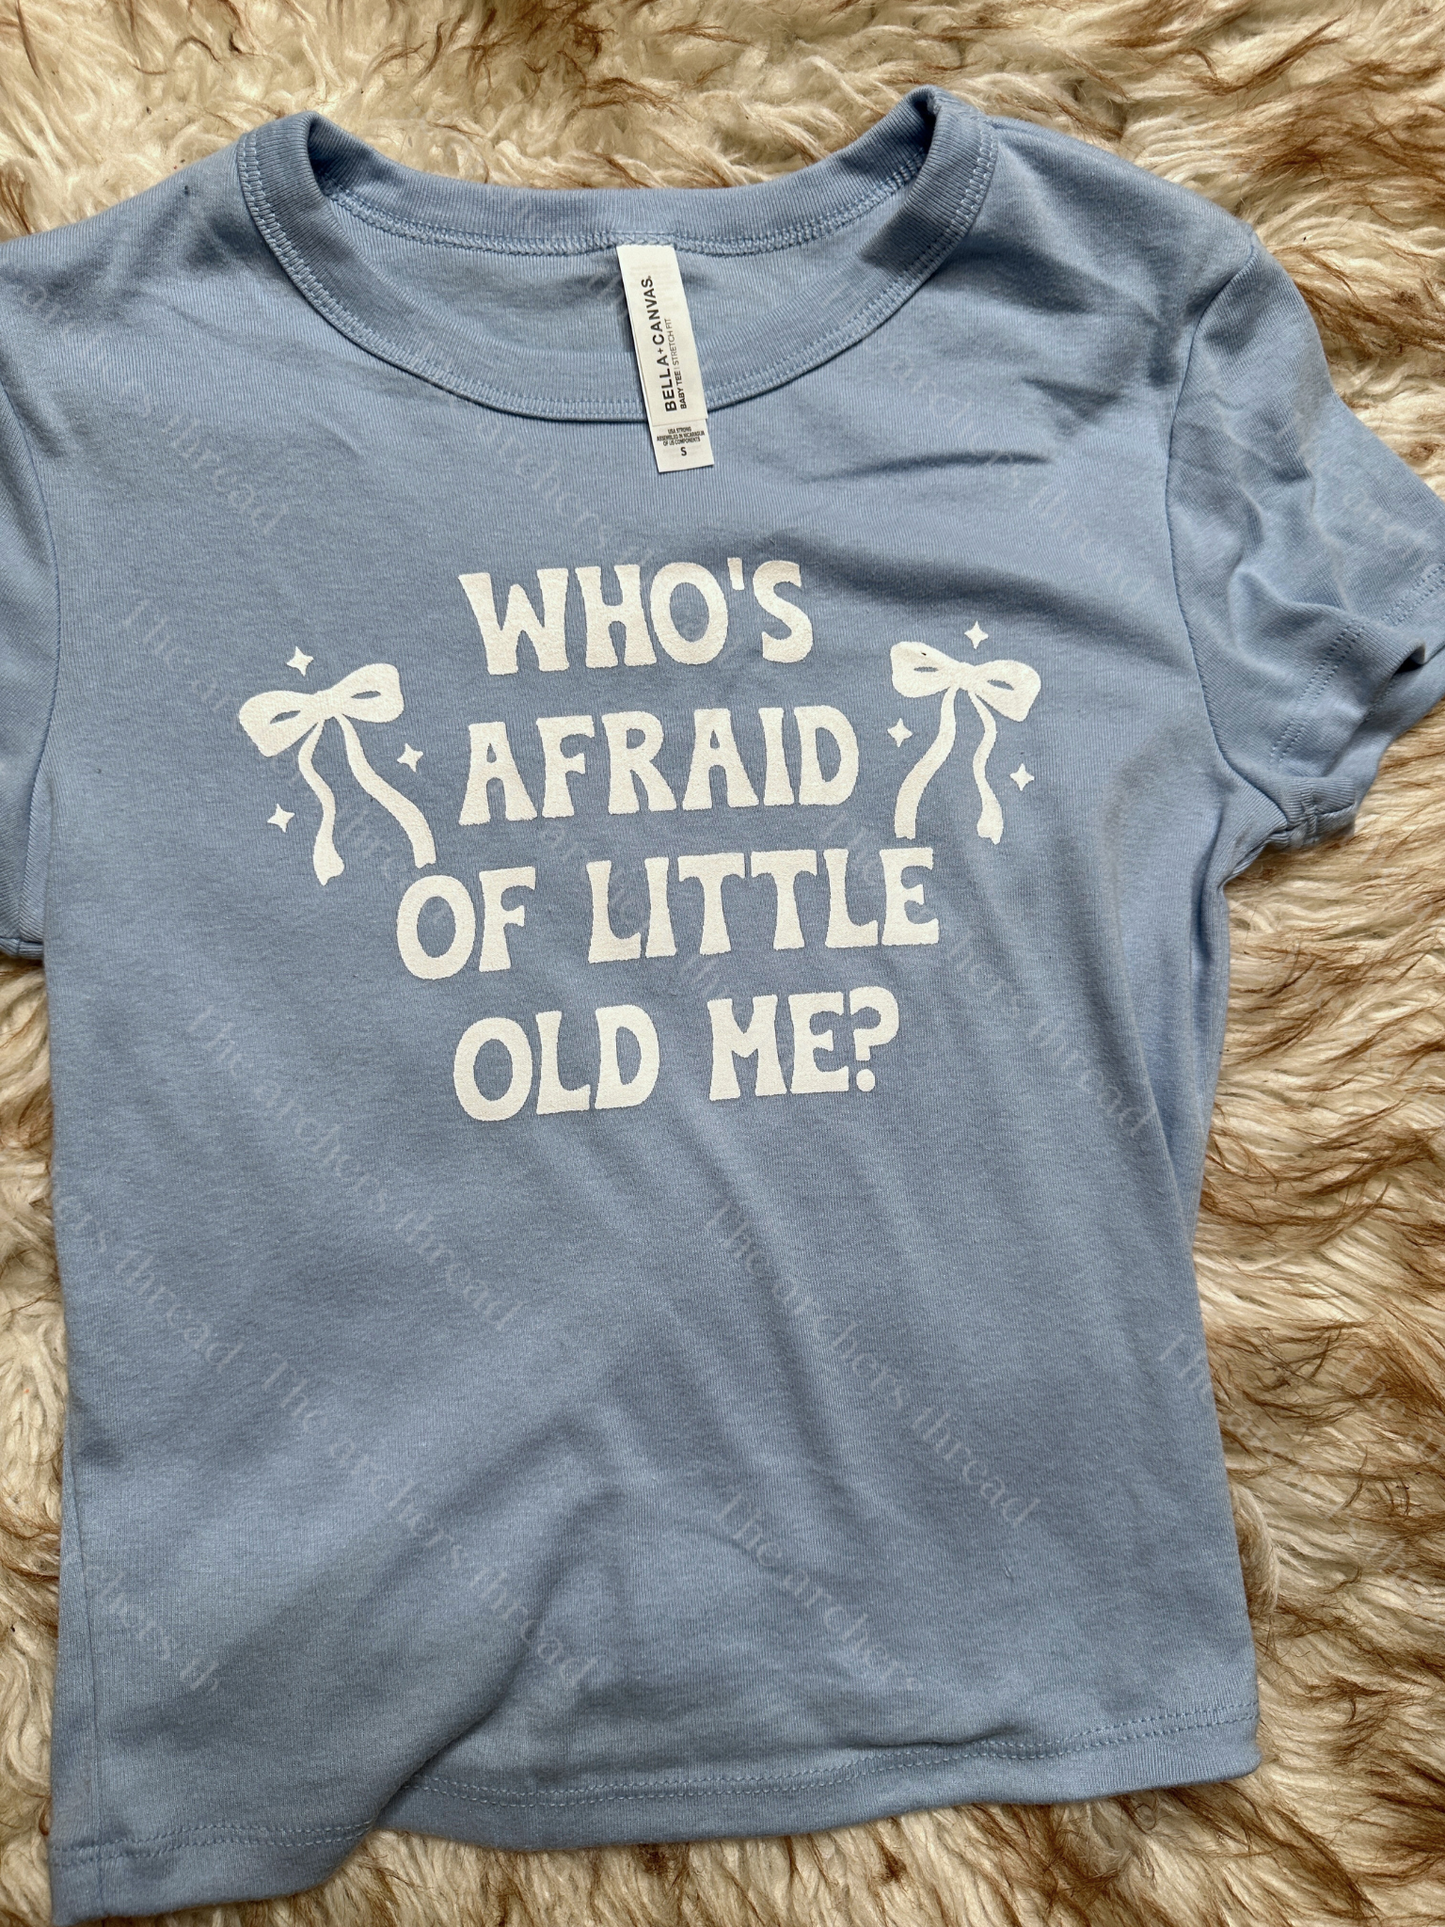 Who’s afraid of little old me?